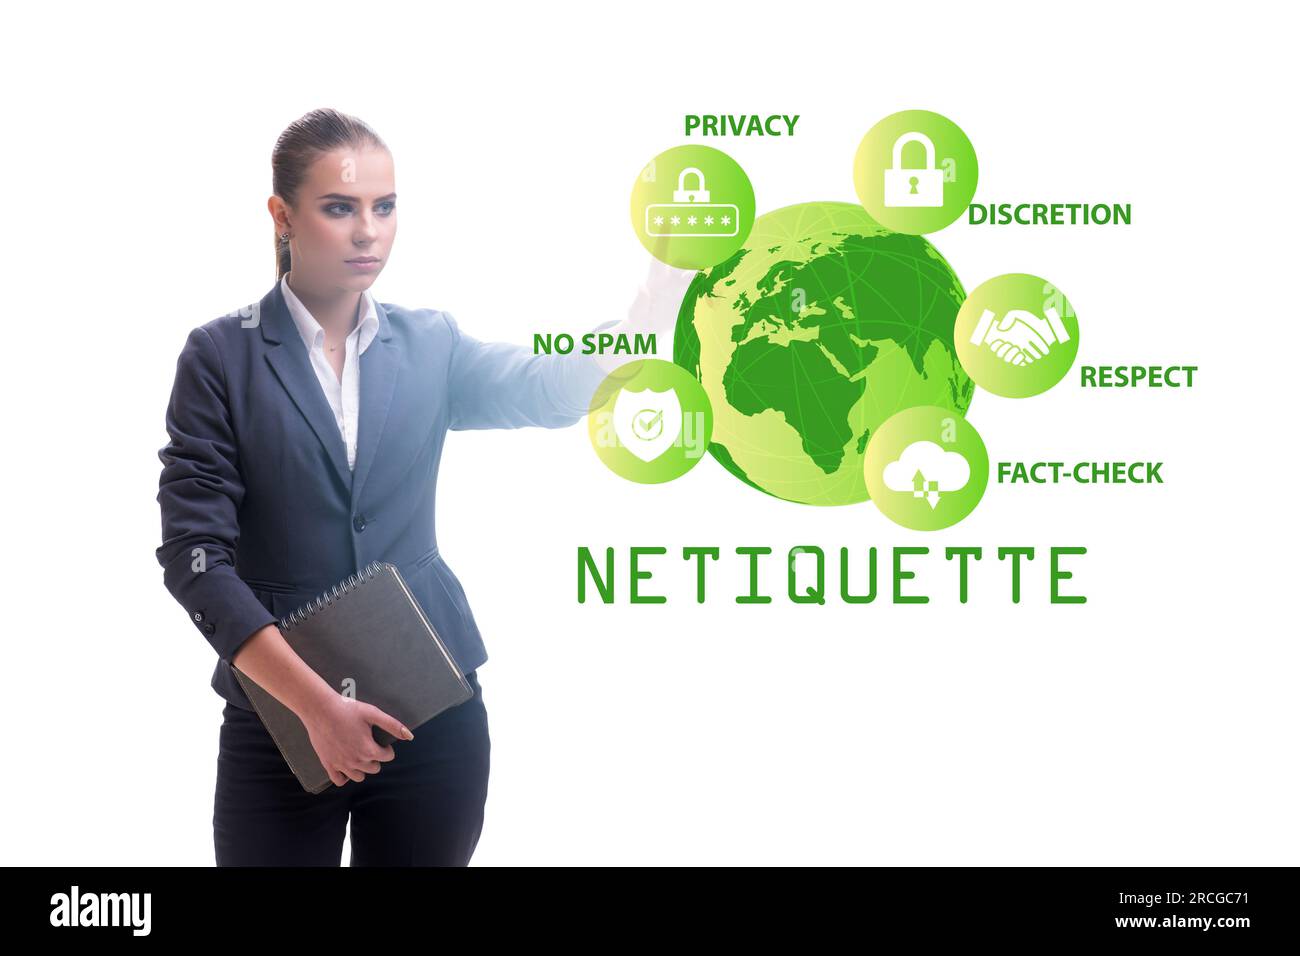 Concept of the etiquette and netiquette Stock Photo